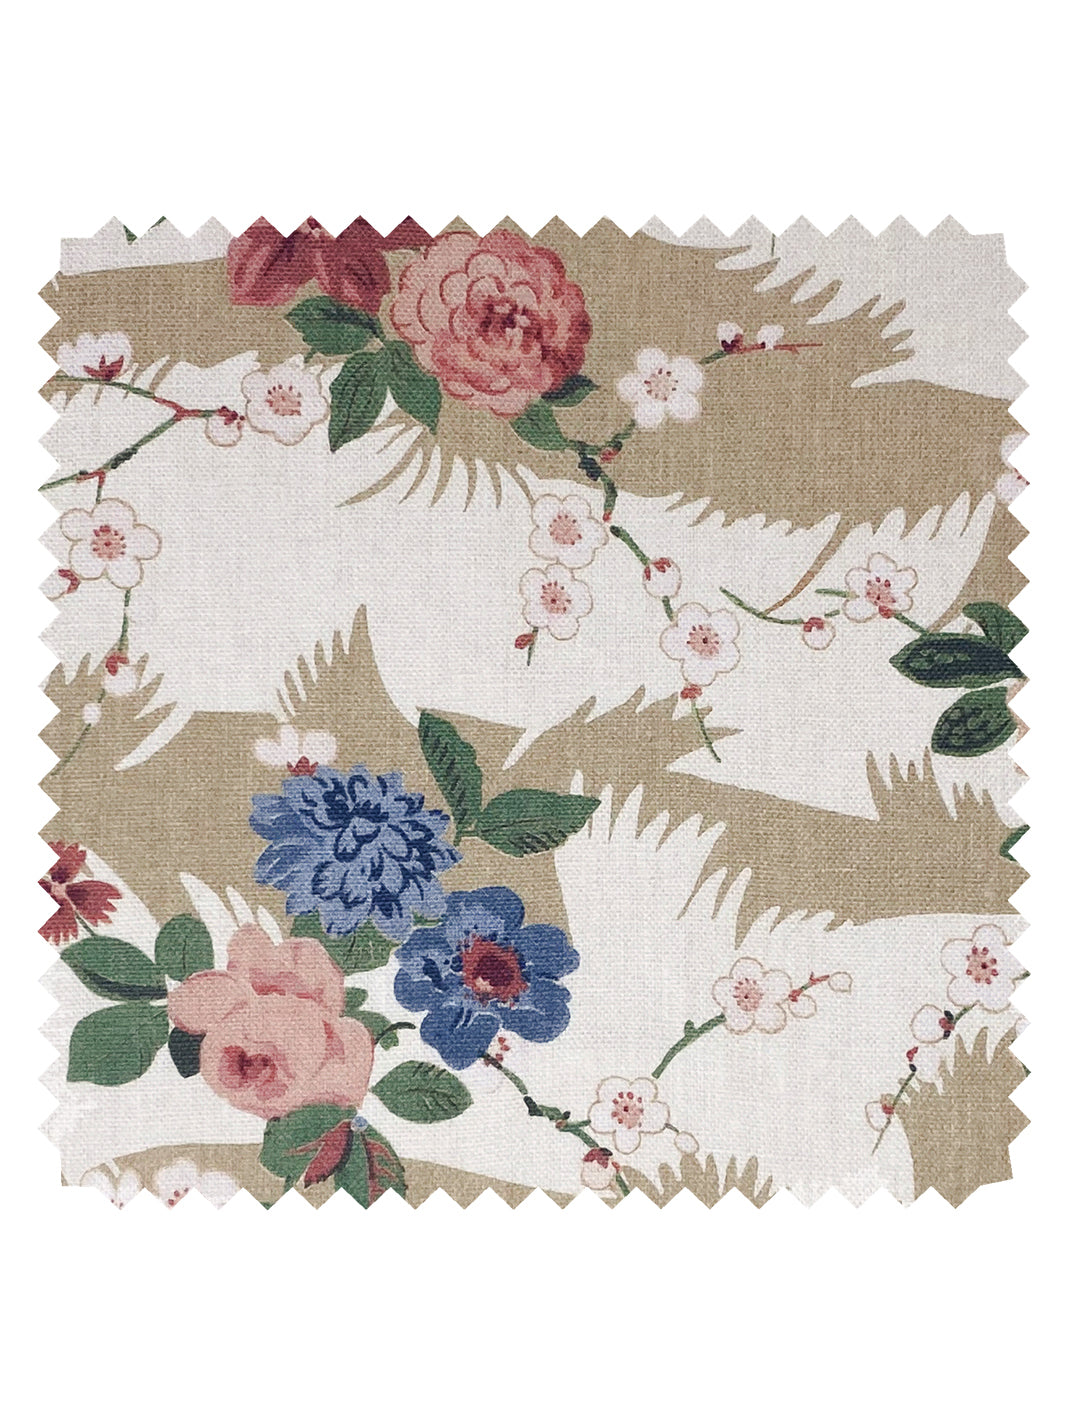 'Dora Chintz' Linen Fabric by Nathan Turner - Green Taupe